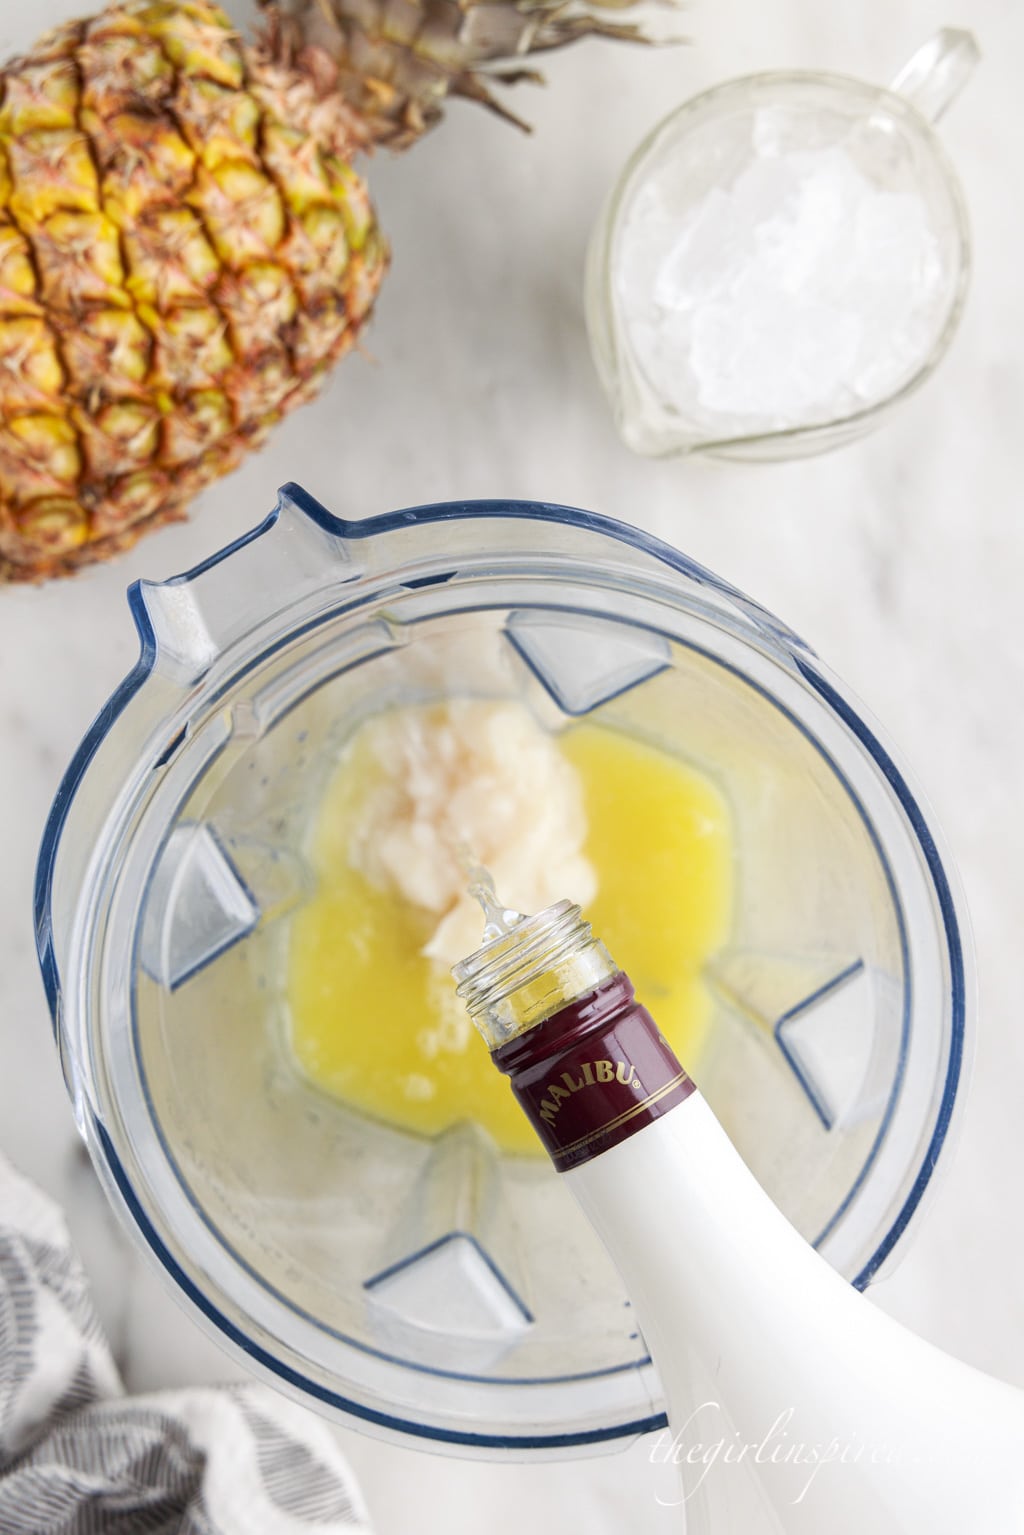 malibu rum pouring into blender filled with pineapple juice and cream of coconut.